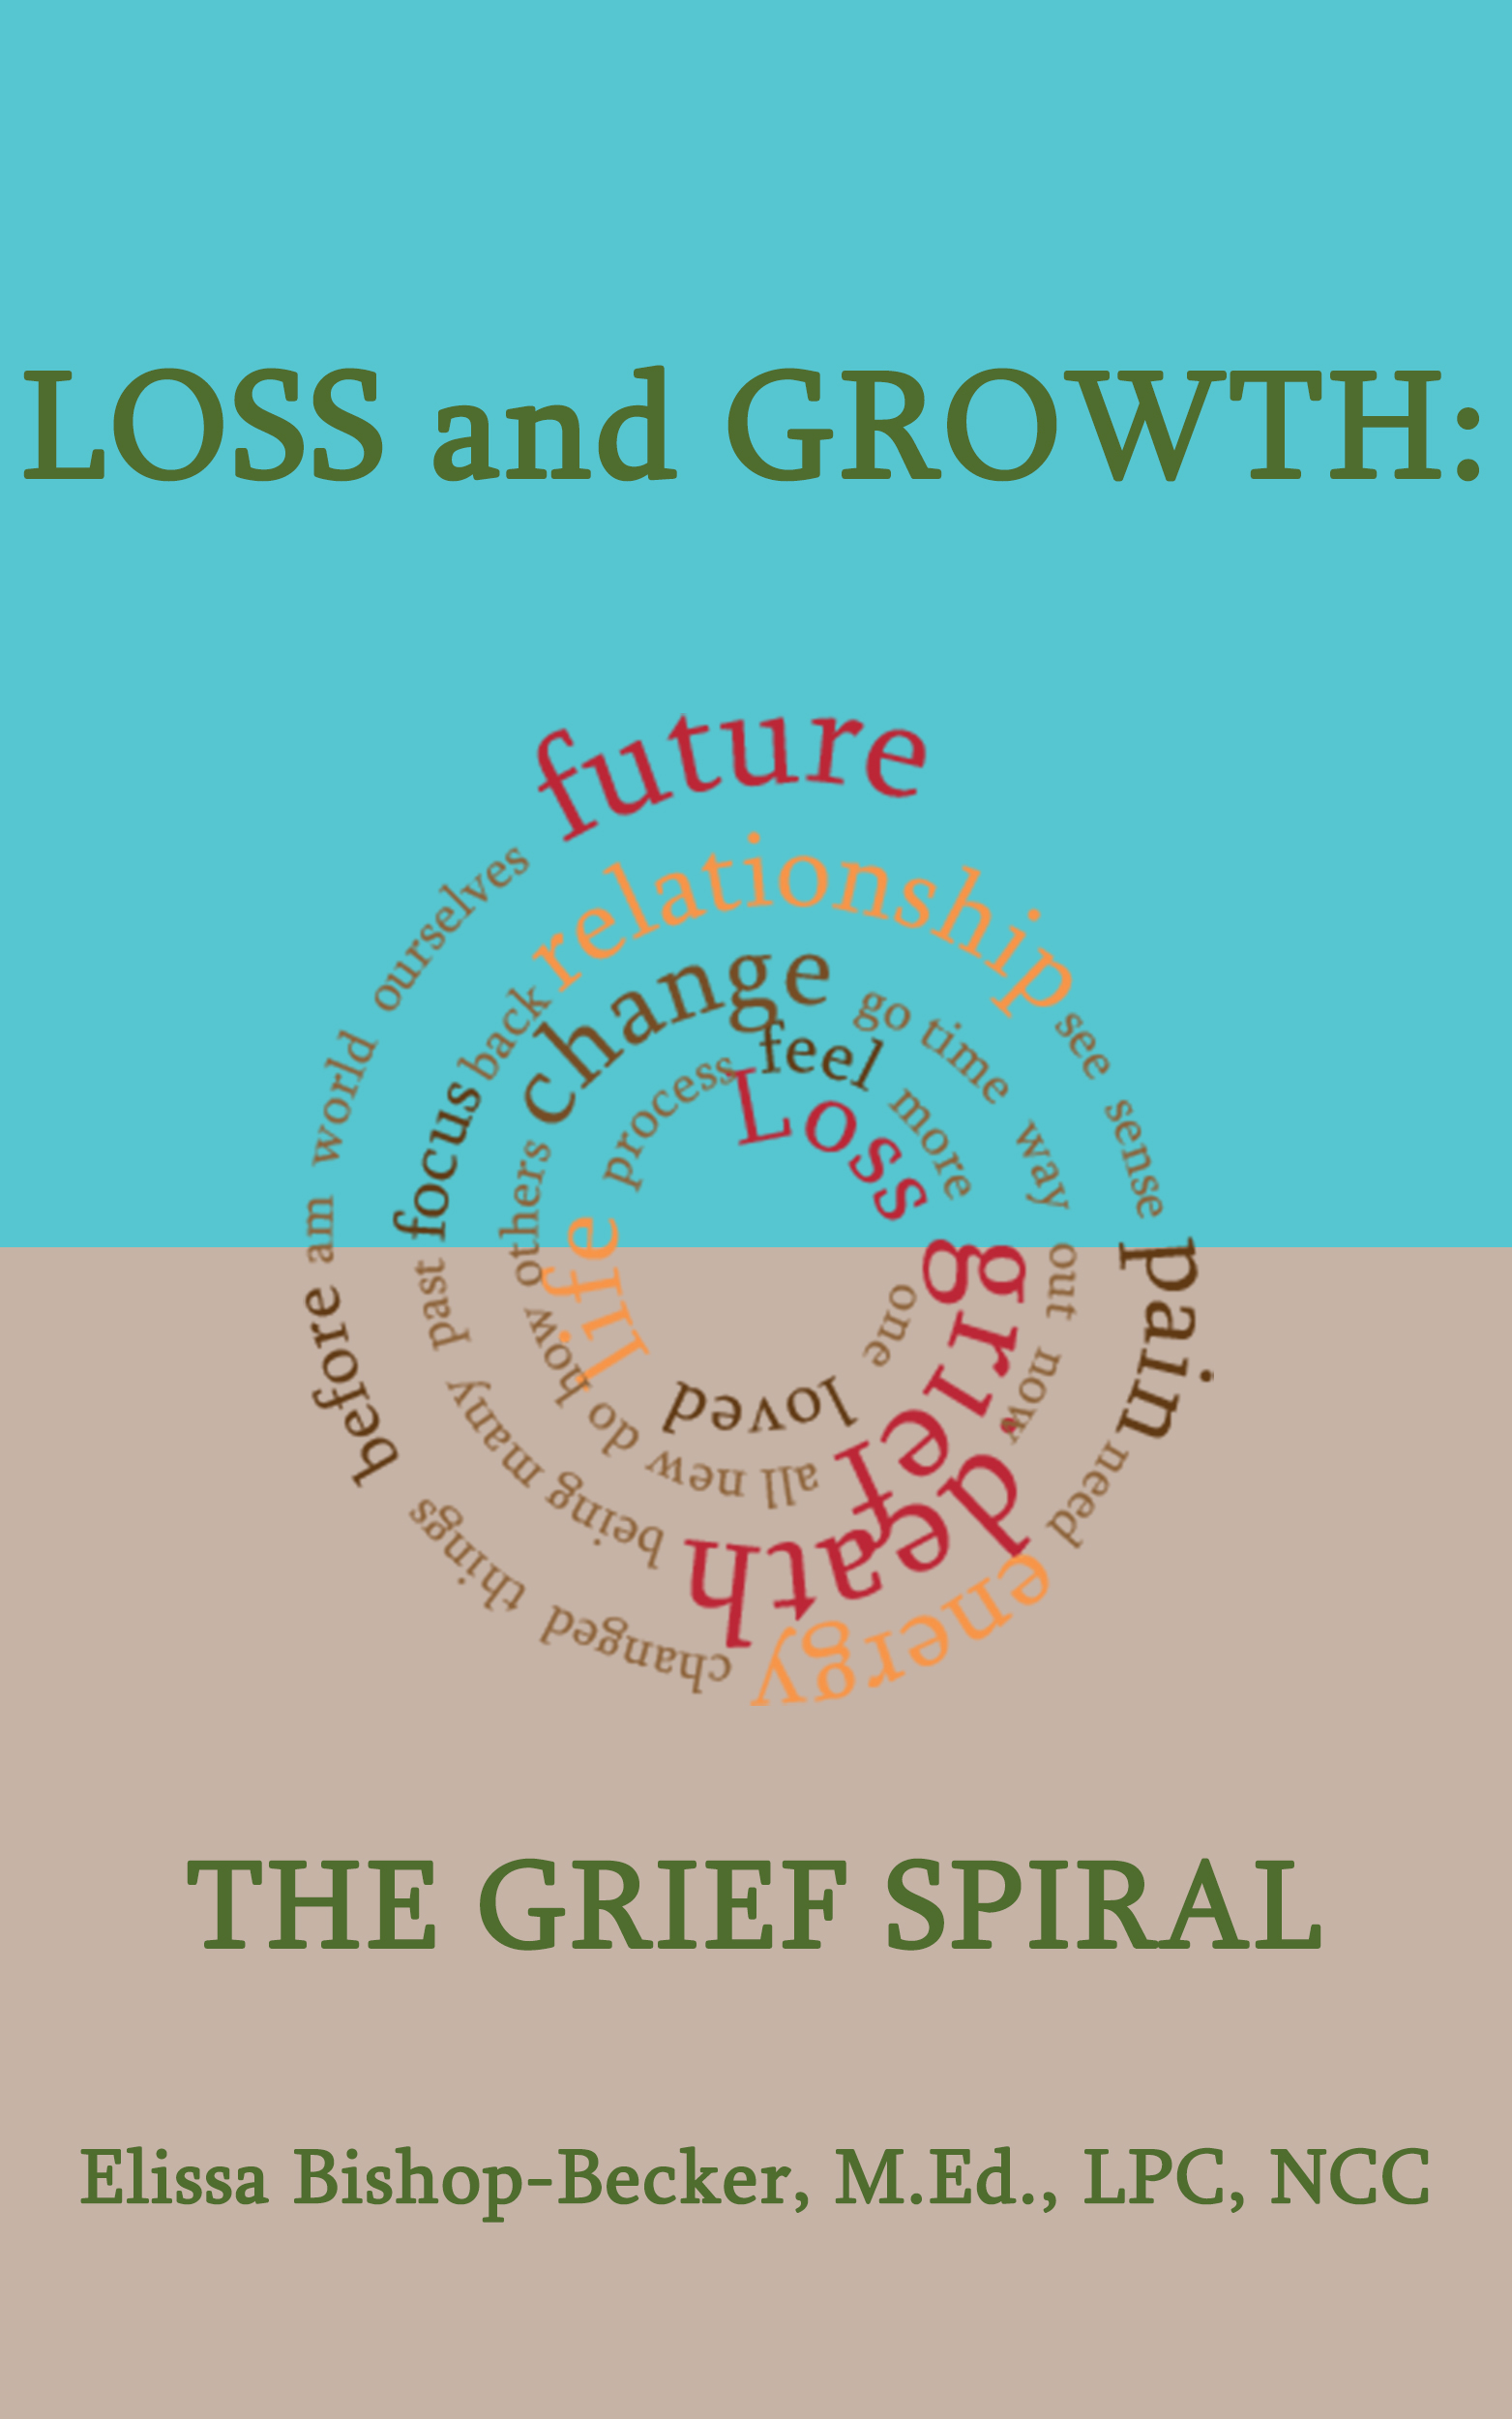 LOSS AND GROWTH: The Grief Spiral